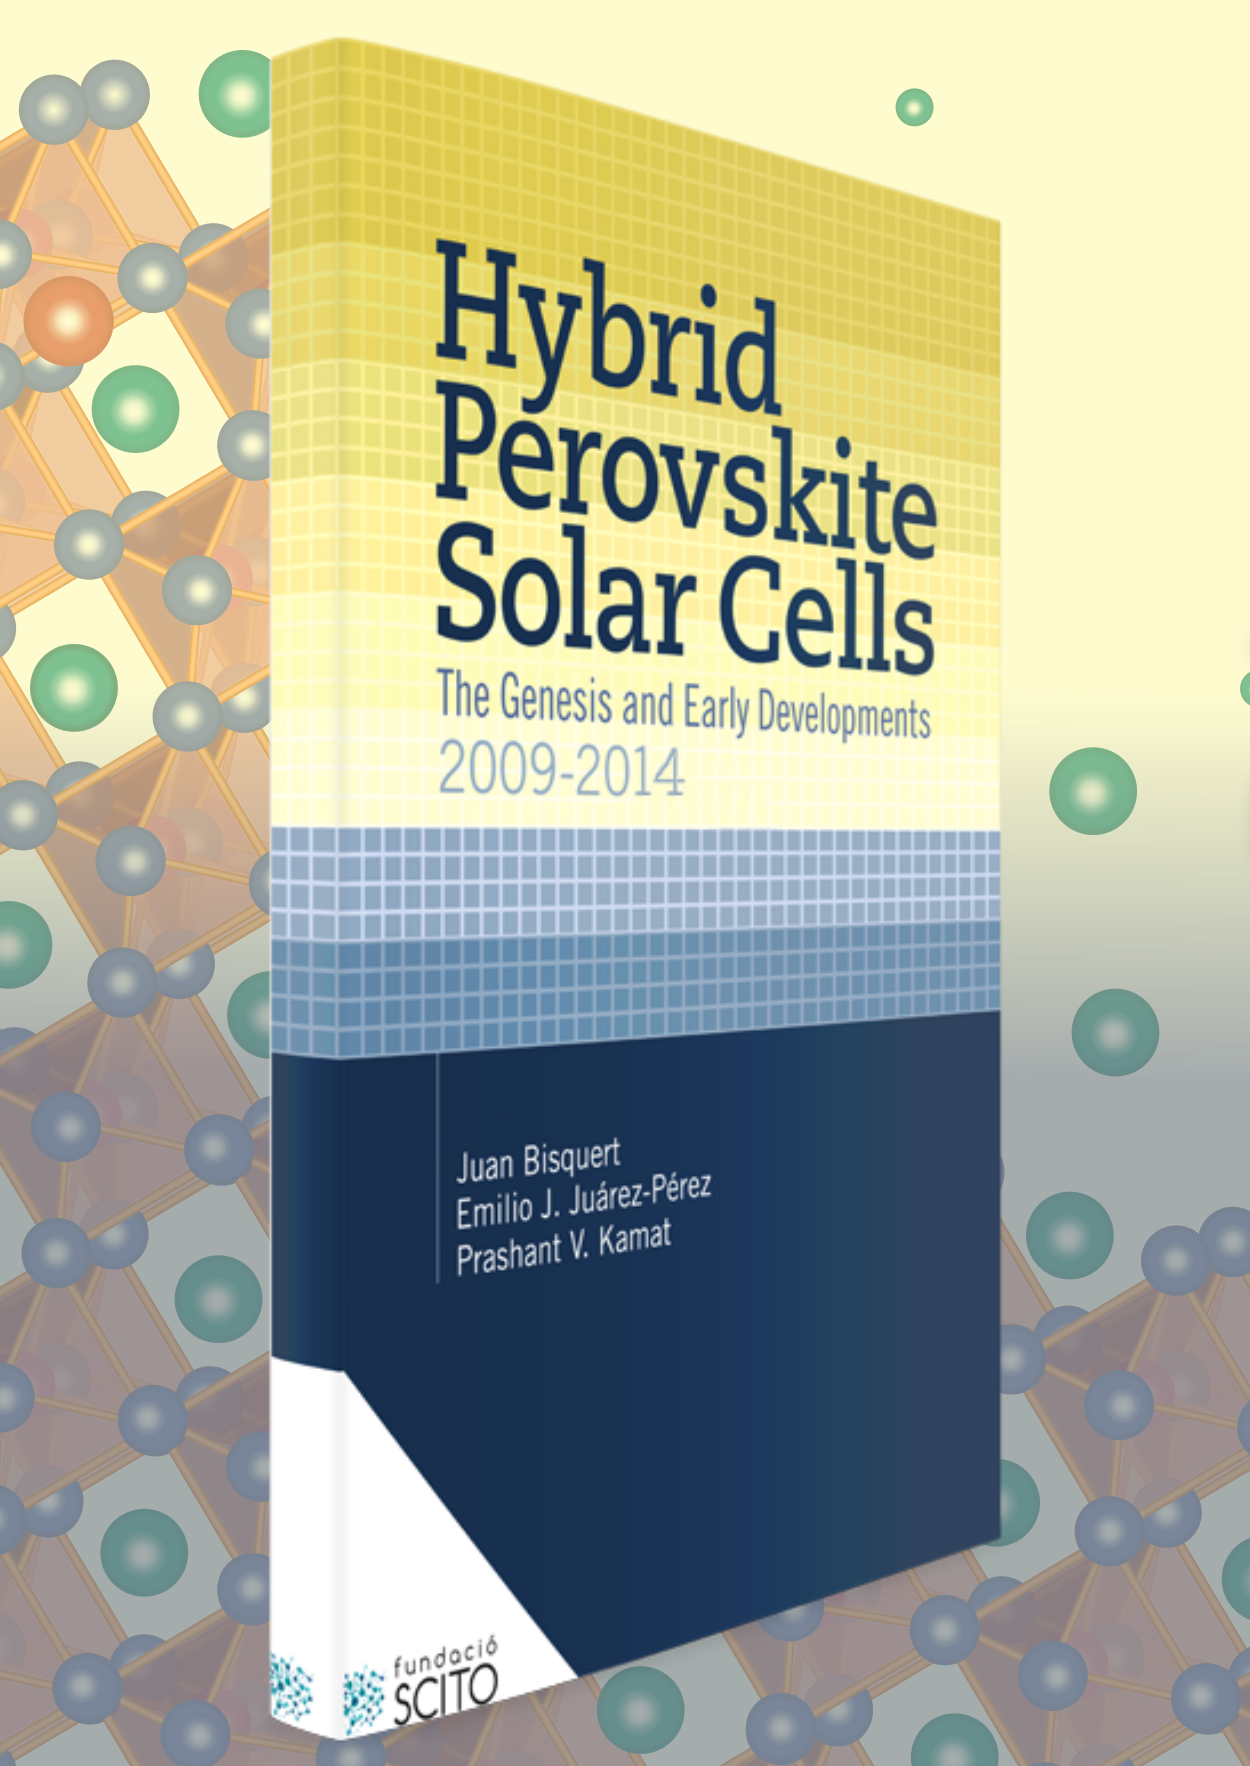 Hybrid Perovskite Solar Cells. The Genesis and Early Developments. 2009-2014